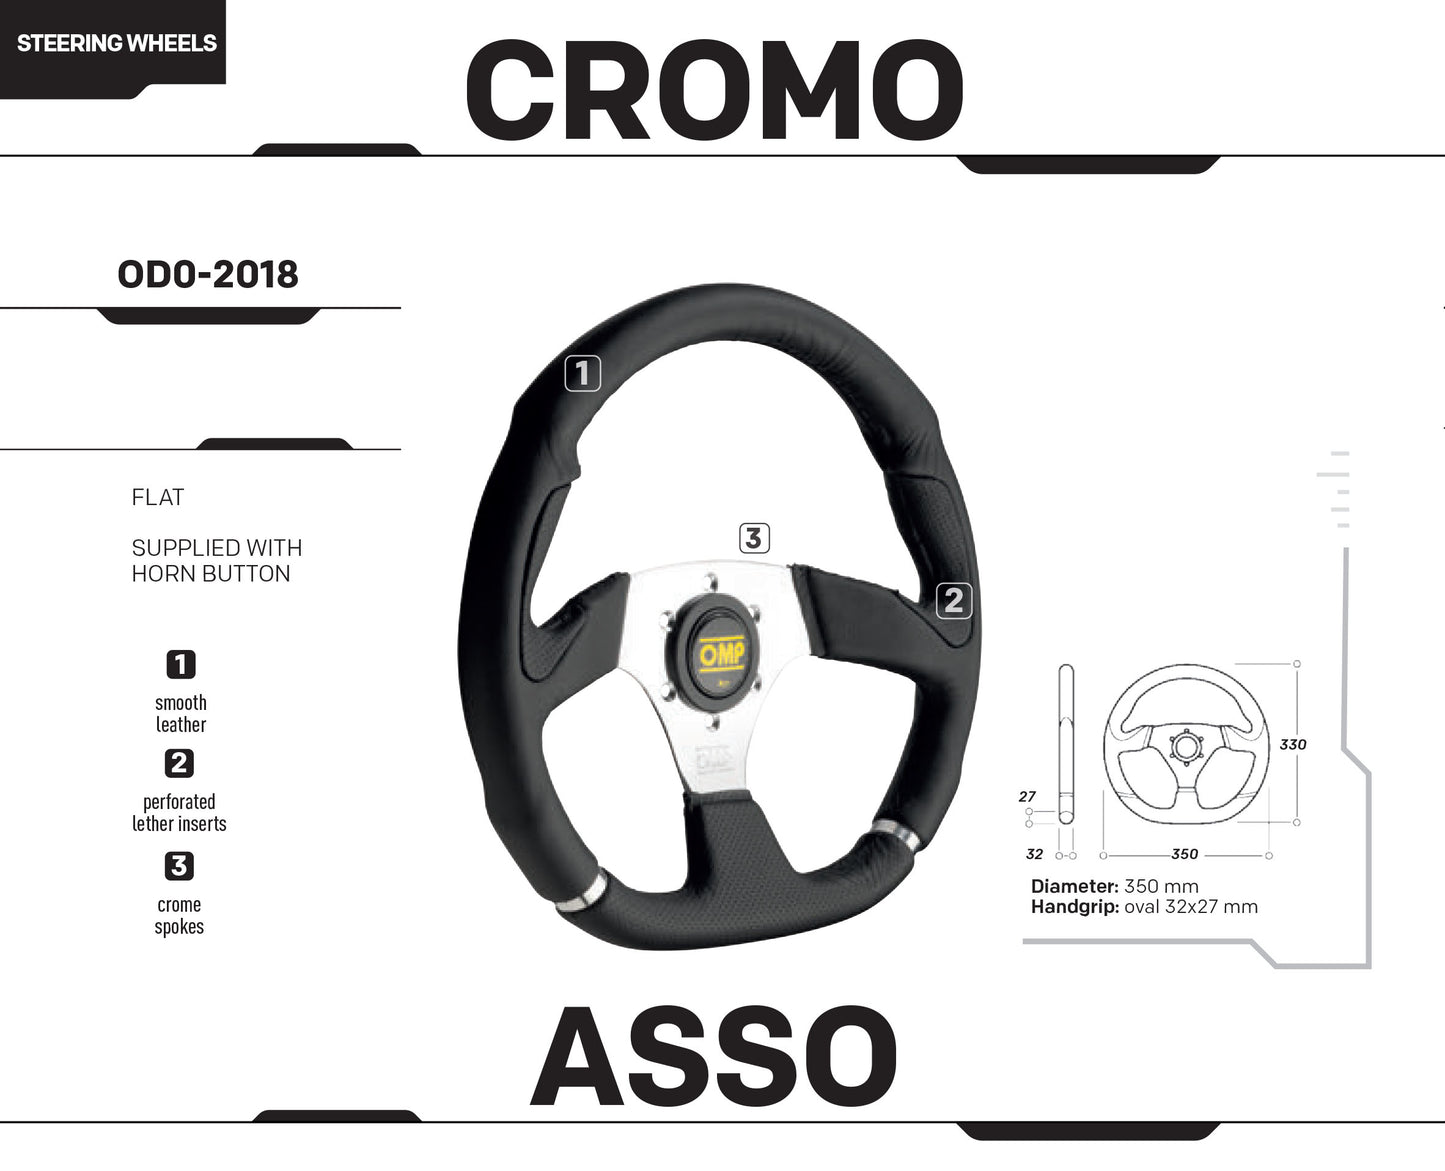 OD/2018/LN OMP CROMO SPORT STEERING WHEEL 350mm CHROME SPOKES in SMOOTH LEATHER!